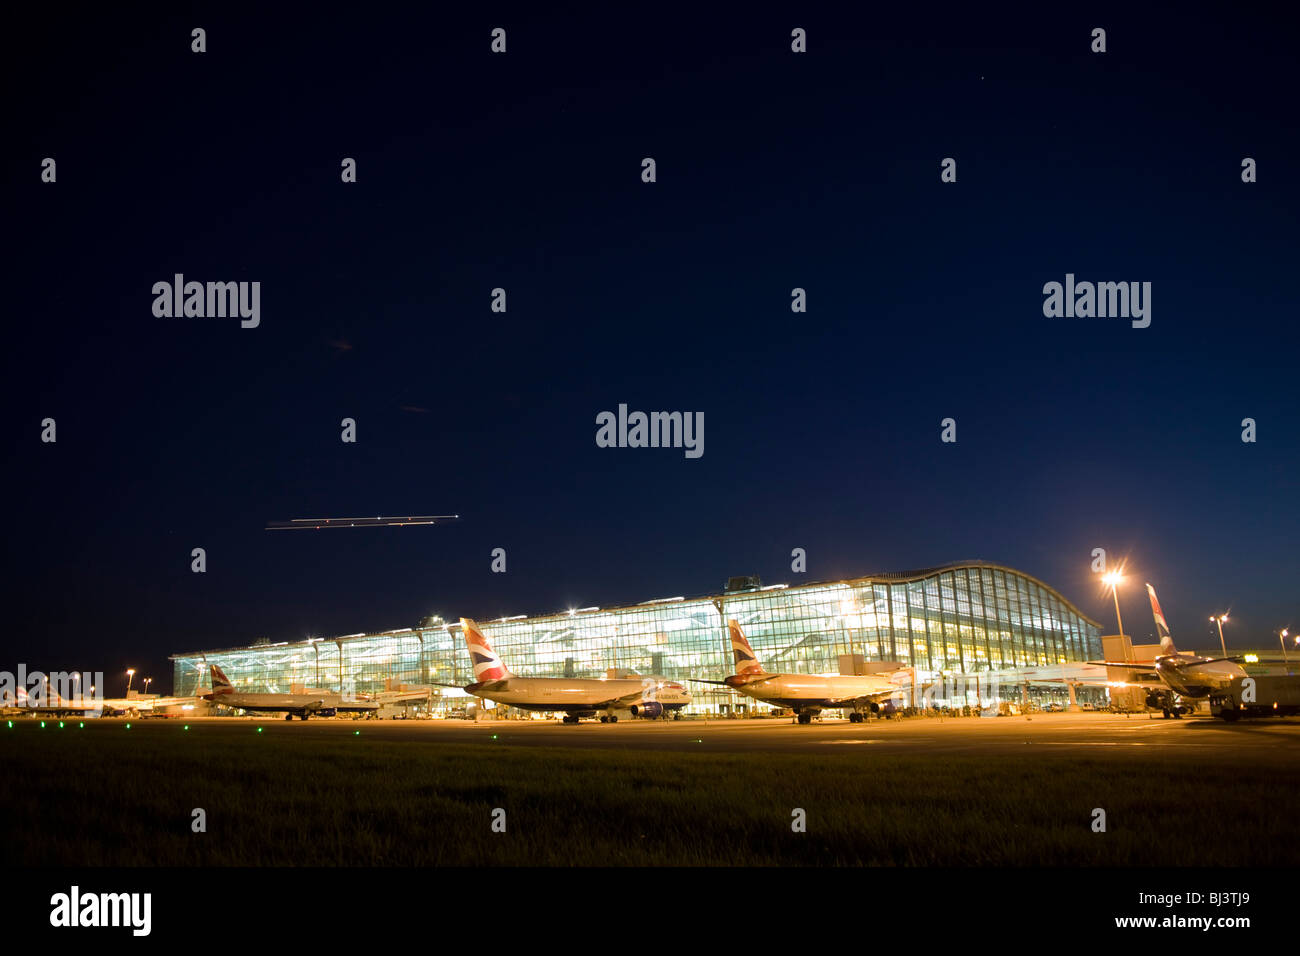 Faint traces of evening meteor shower in the sky, a wide exterior view of Heathrow Airport's Terminal 5. Stock Photo